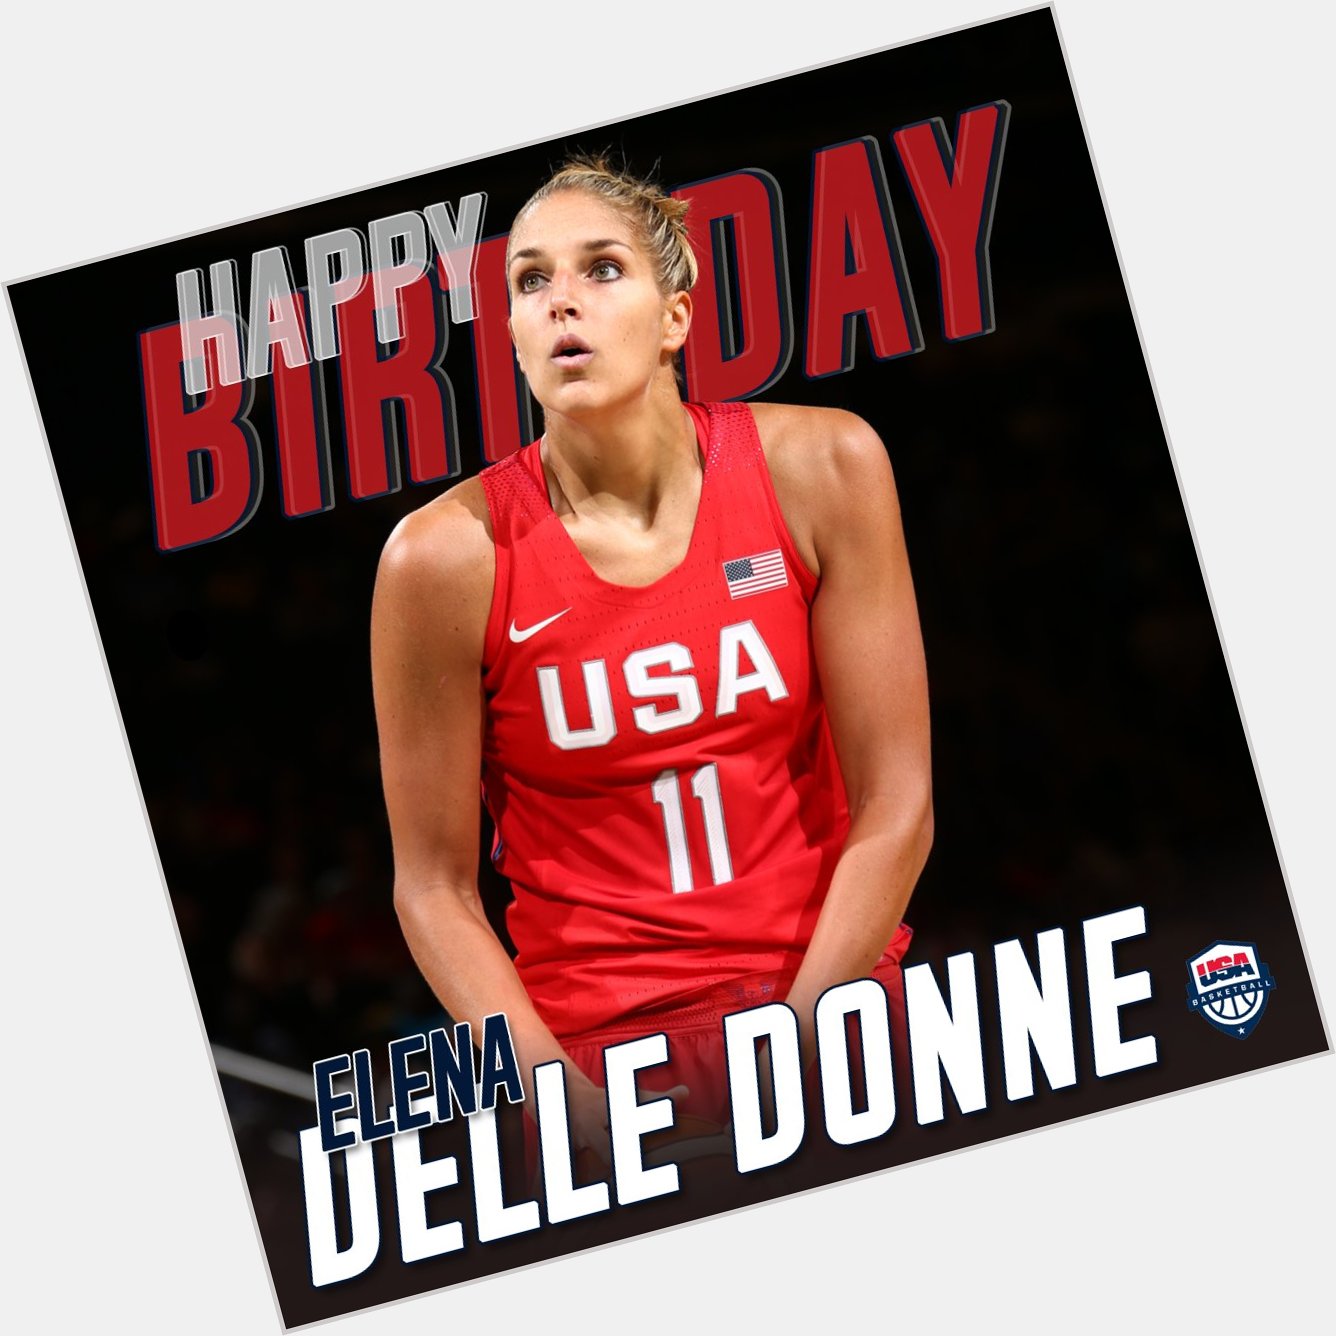 Wishing a happy birthday to two-time USA gold medalist, Elena Delle Donne!   